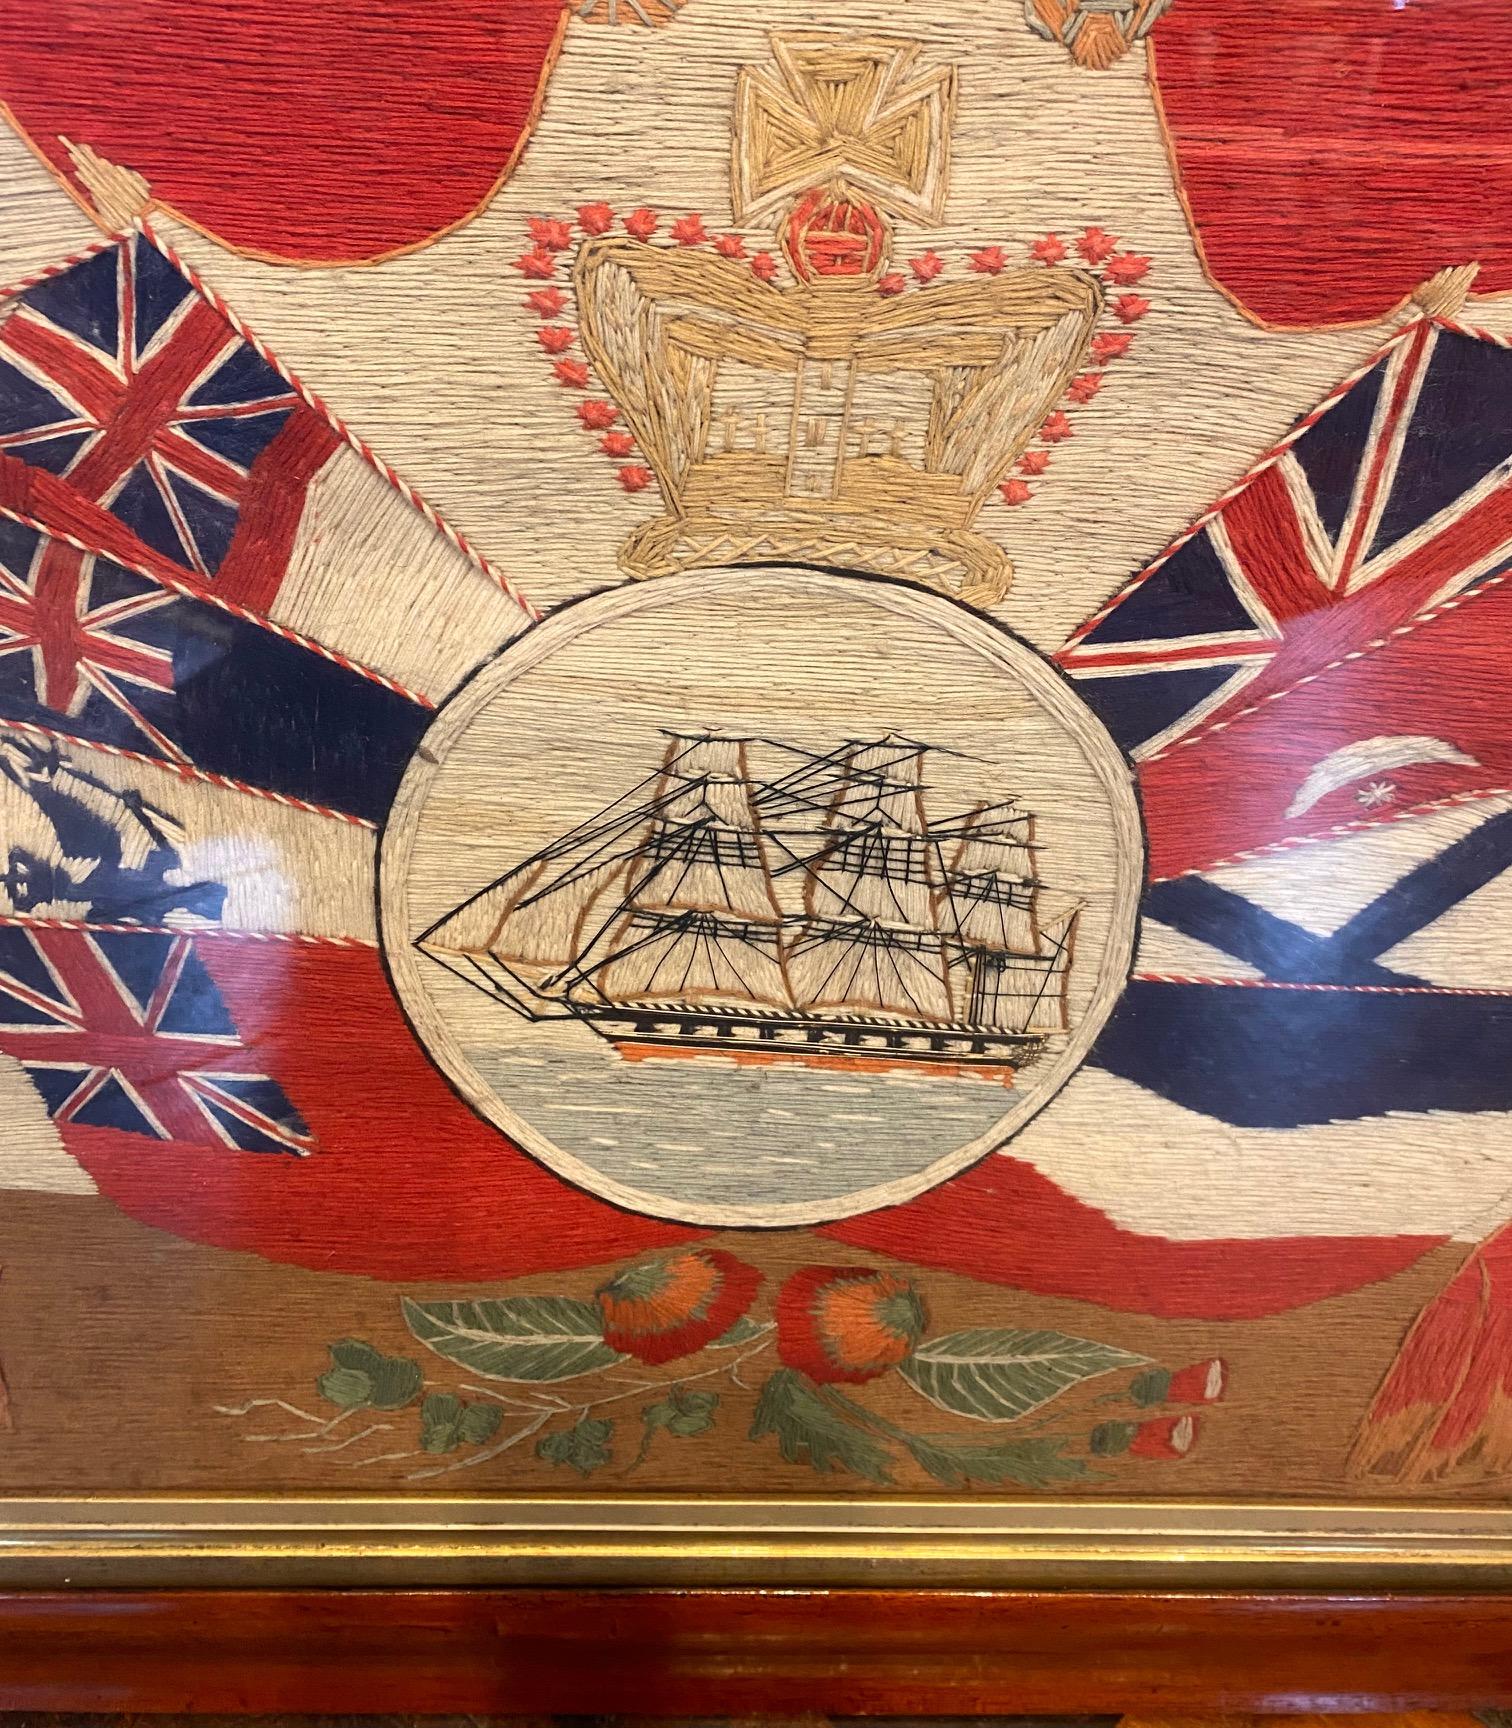 Late 19th century Sailor's Woolwork with Ship and Array of Flags, circa 1899, a classic and pretty sophisticated folk art woolie with a Ship under full sail, presented in a reserve beneath a crown and flanked by an array of the flags of Western